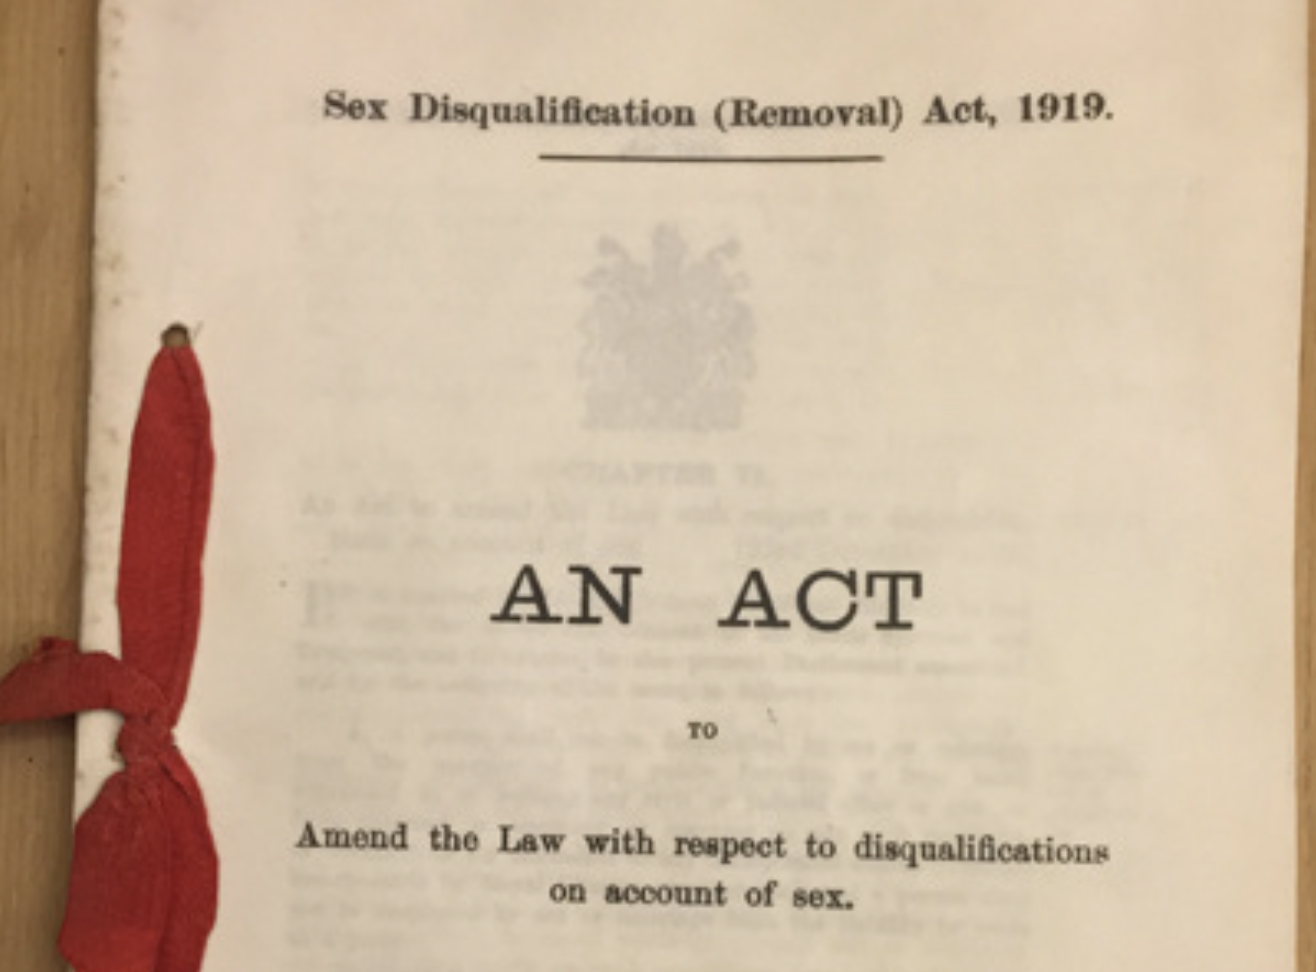 This Year Marks The Centenary Of The Sex Disqualification Removal Act